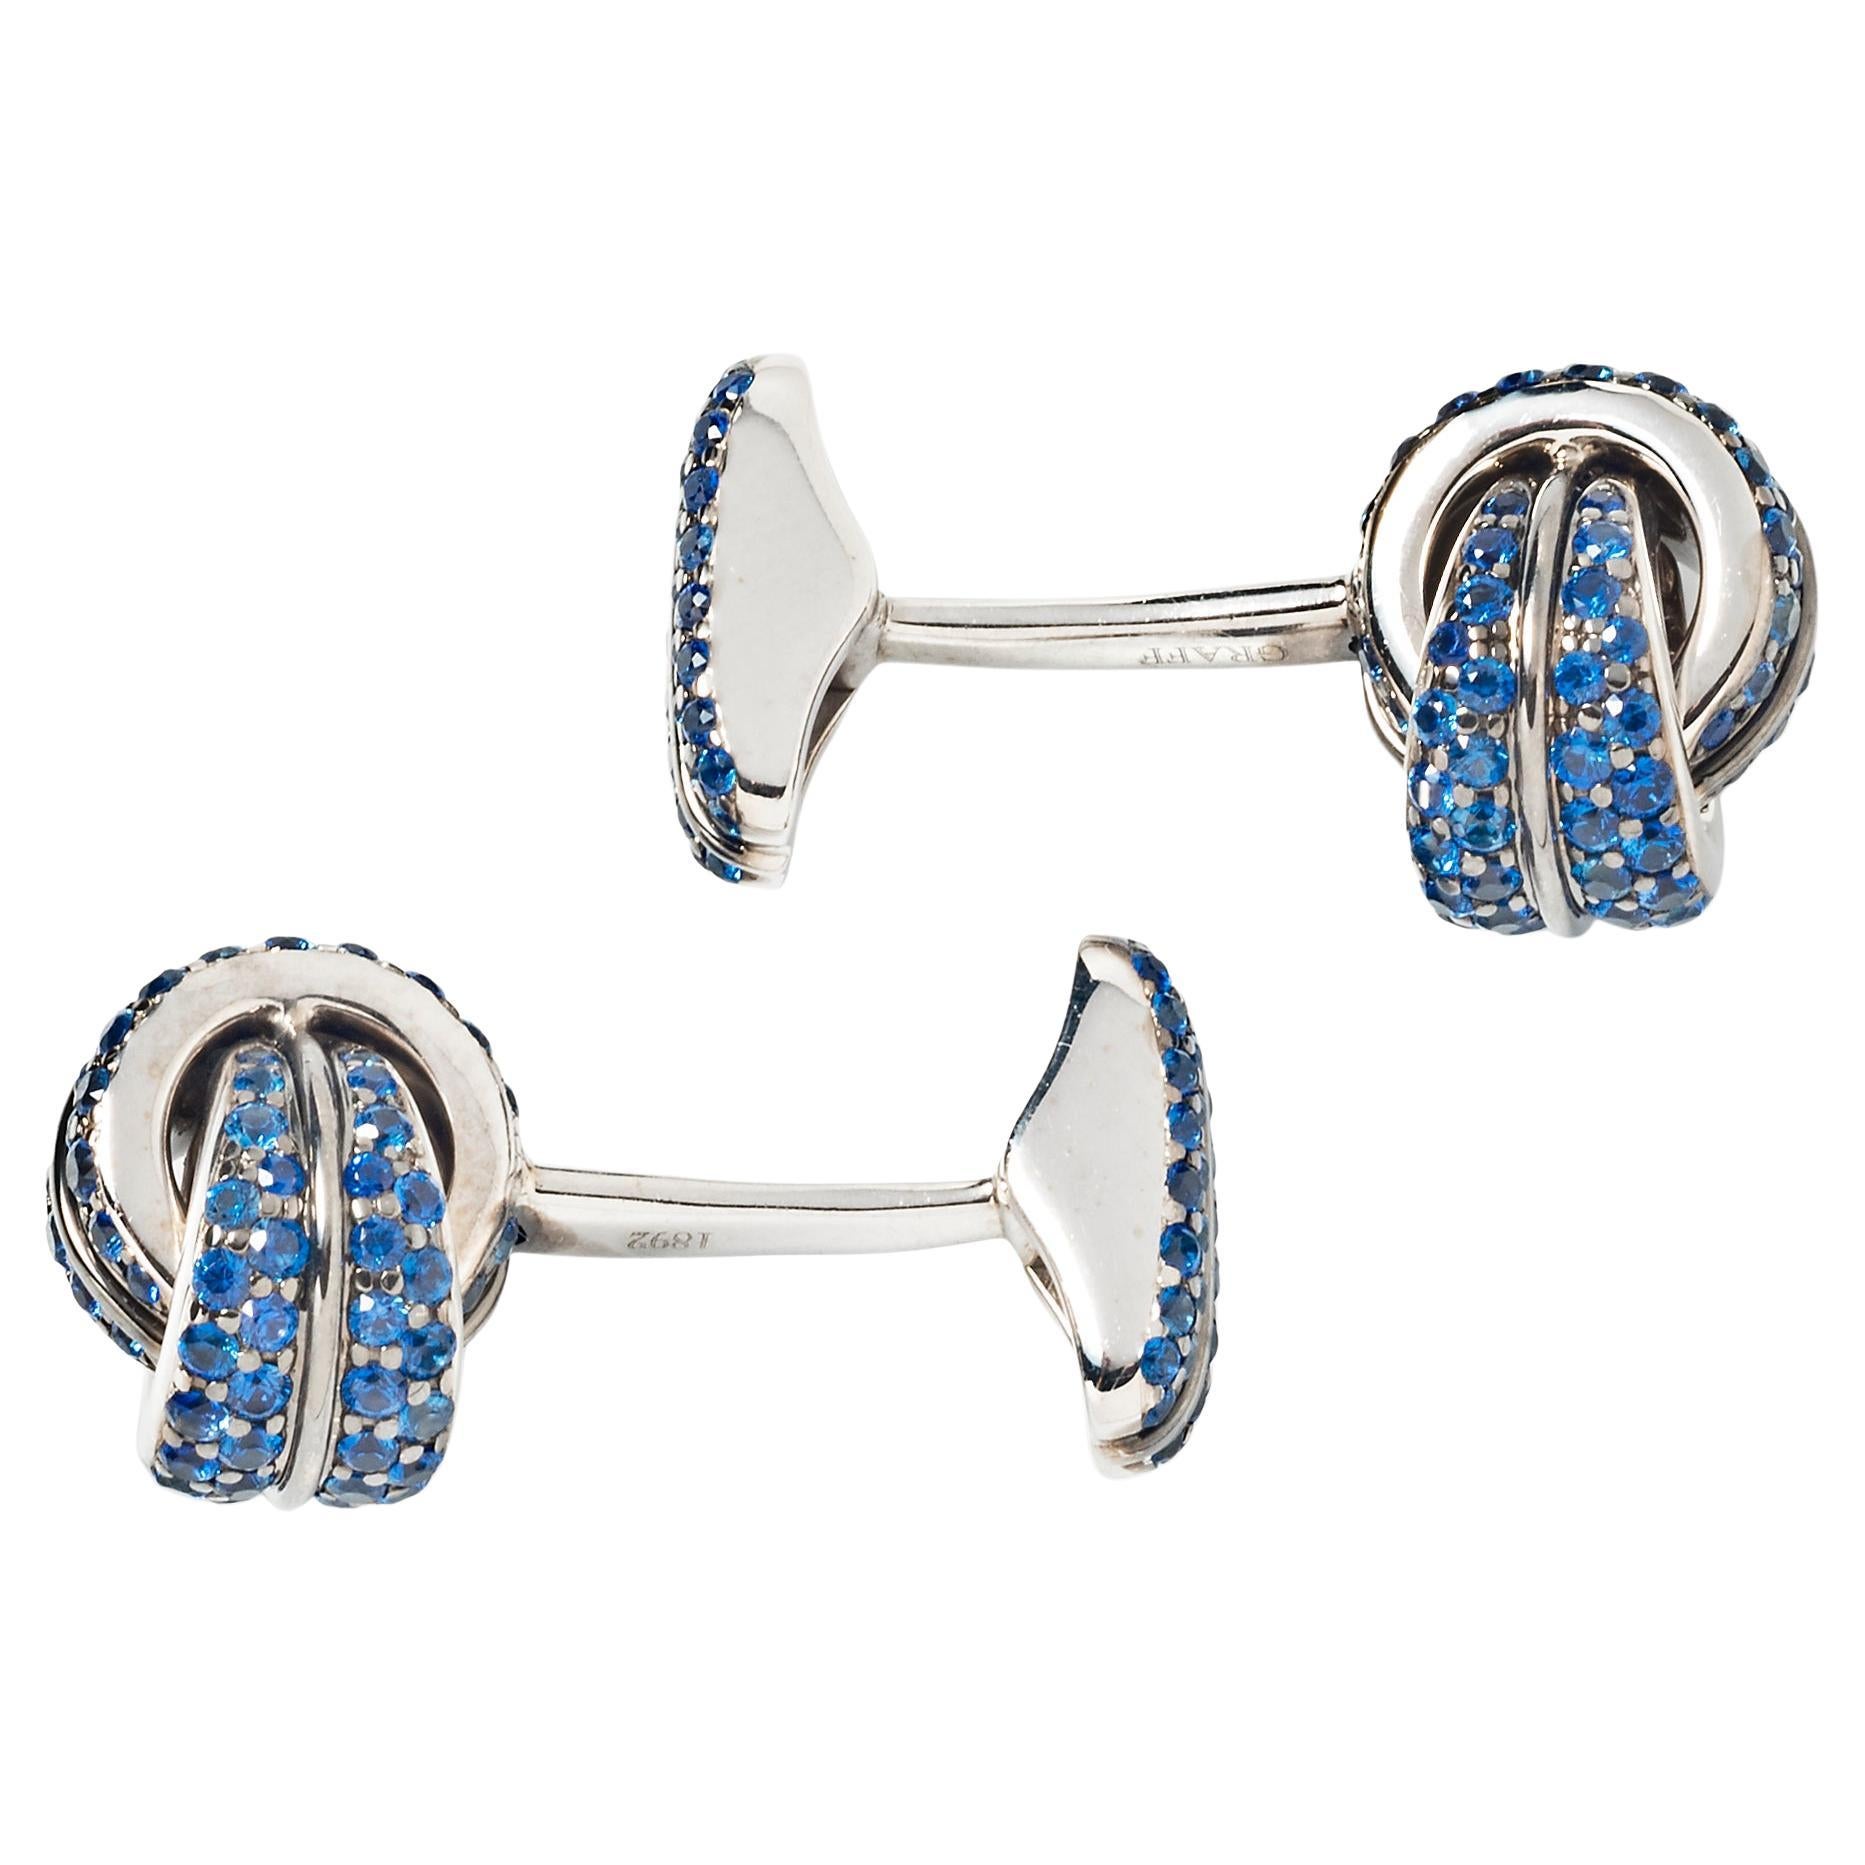 An elegant finishing touch for the well-dressed man, these Graff cufflinks feature deep blue channel-set sapphires mounted in 18k white gold.

Approximately 3.90 carats of sapphire 
18k white gold 
1.25 x .375” 
Signed Graff